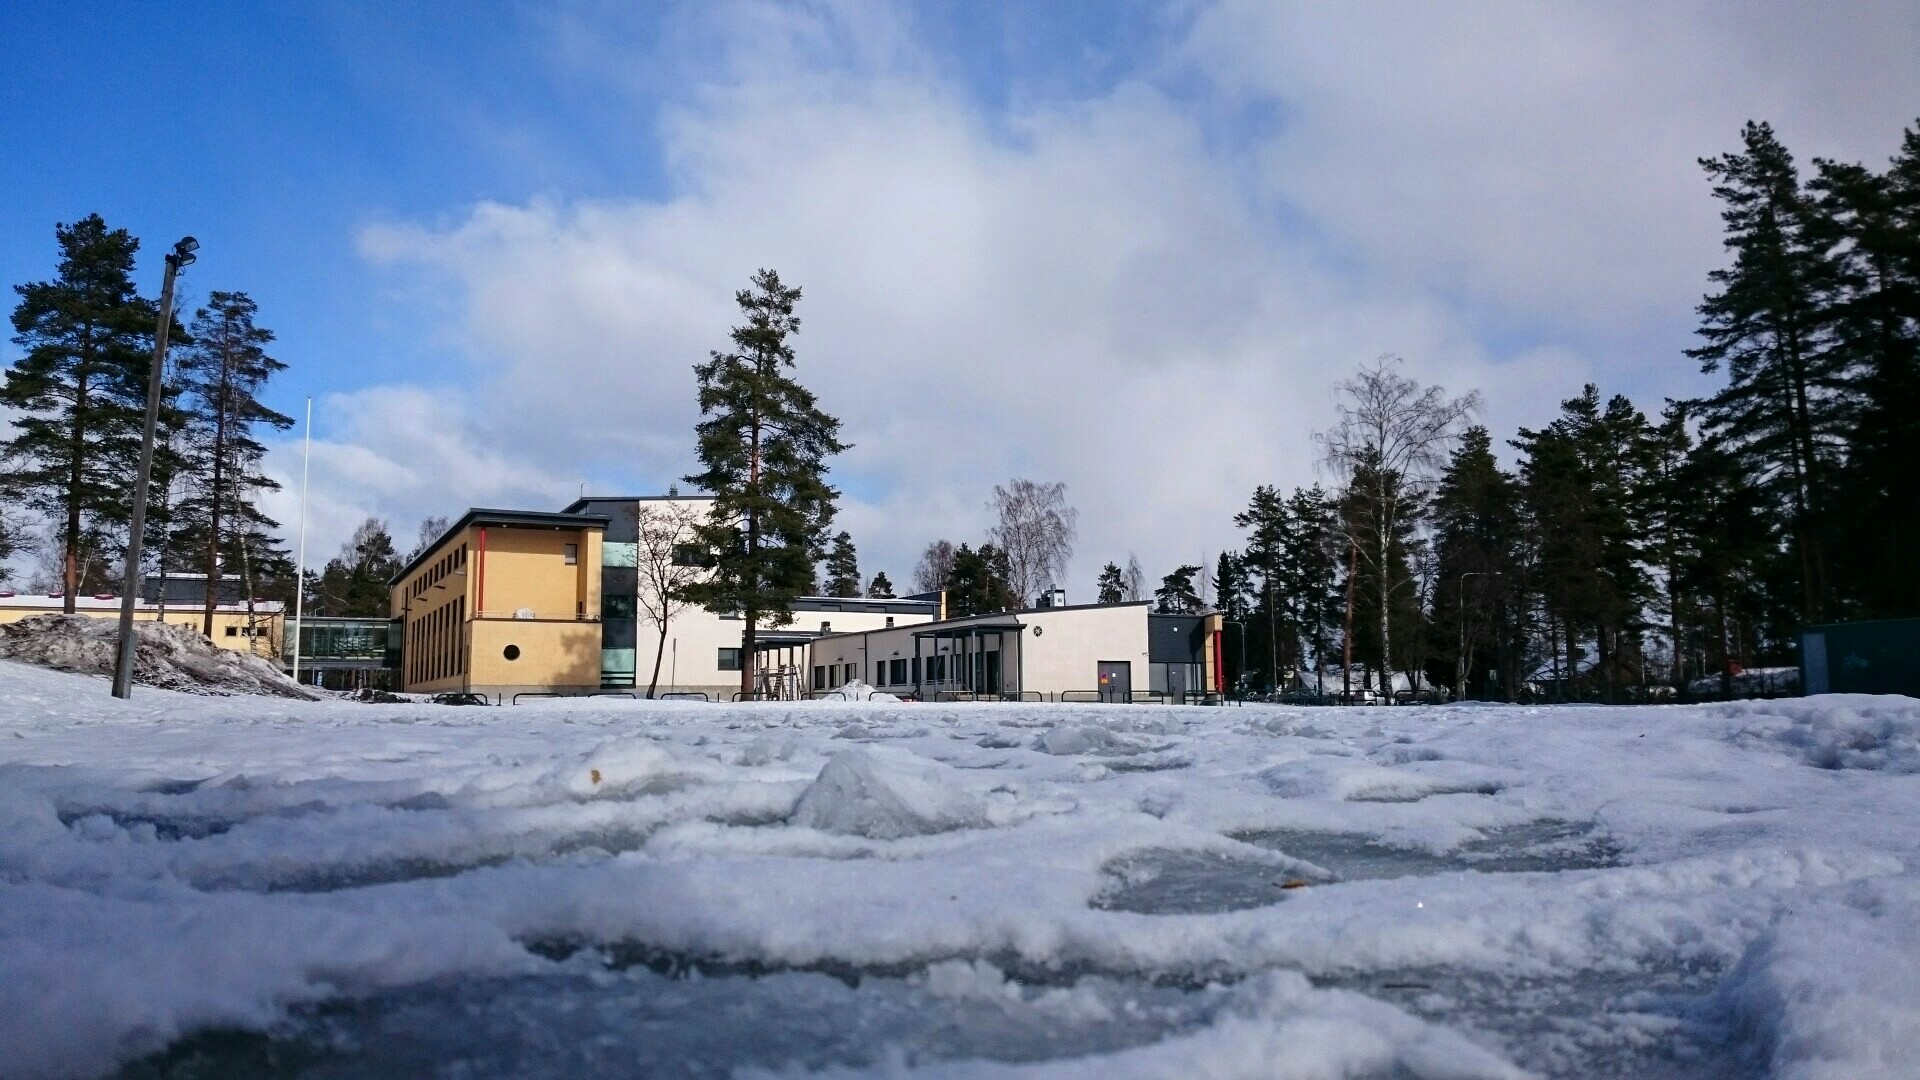 Our school in March 2016